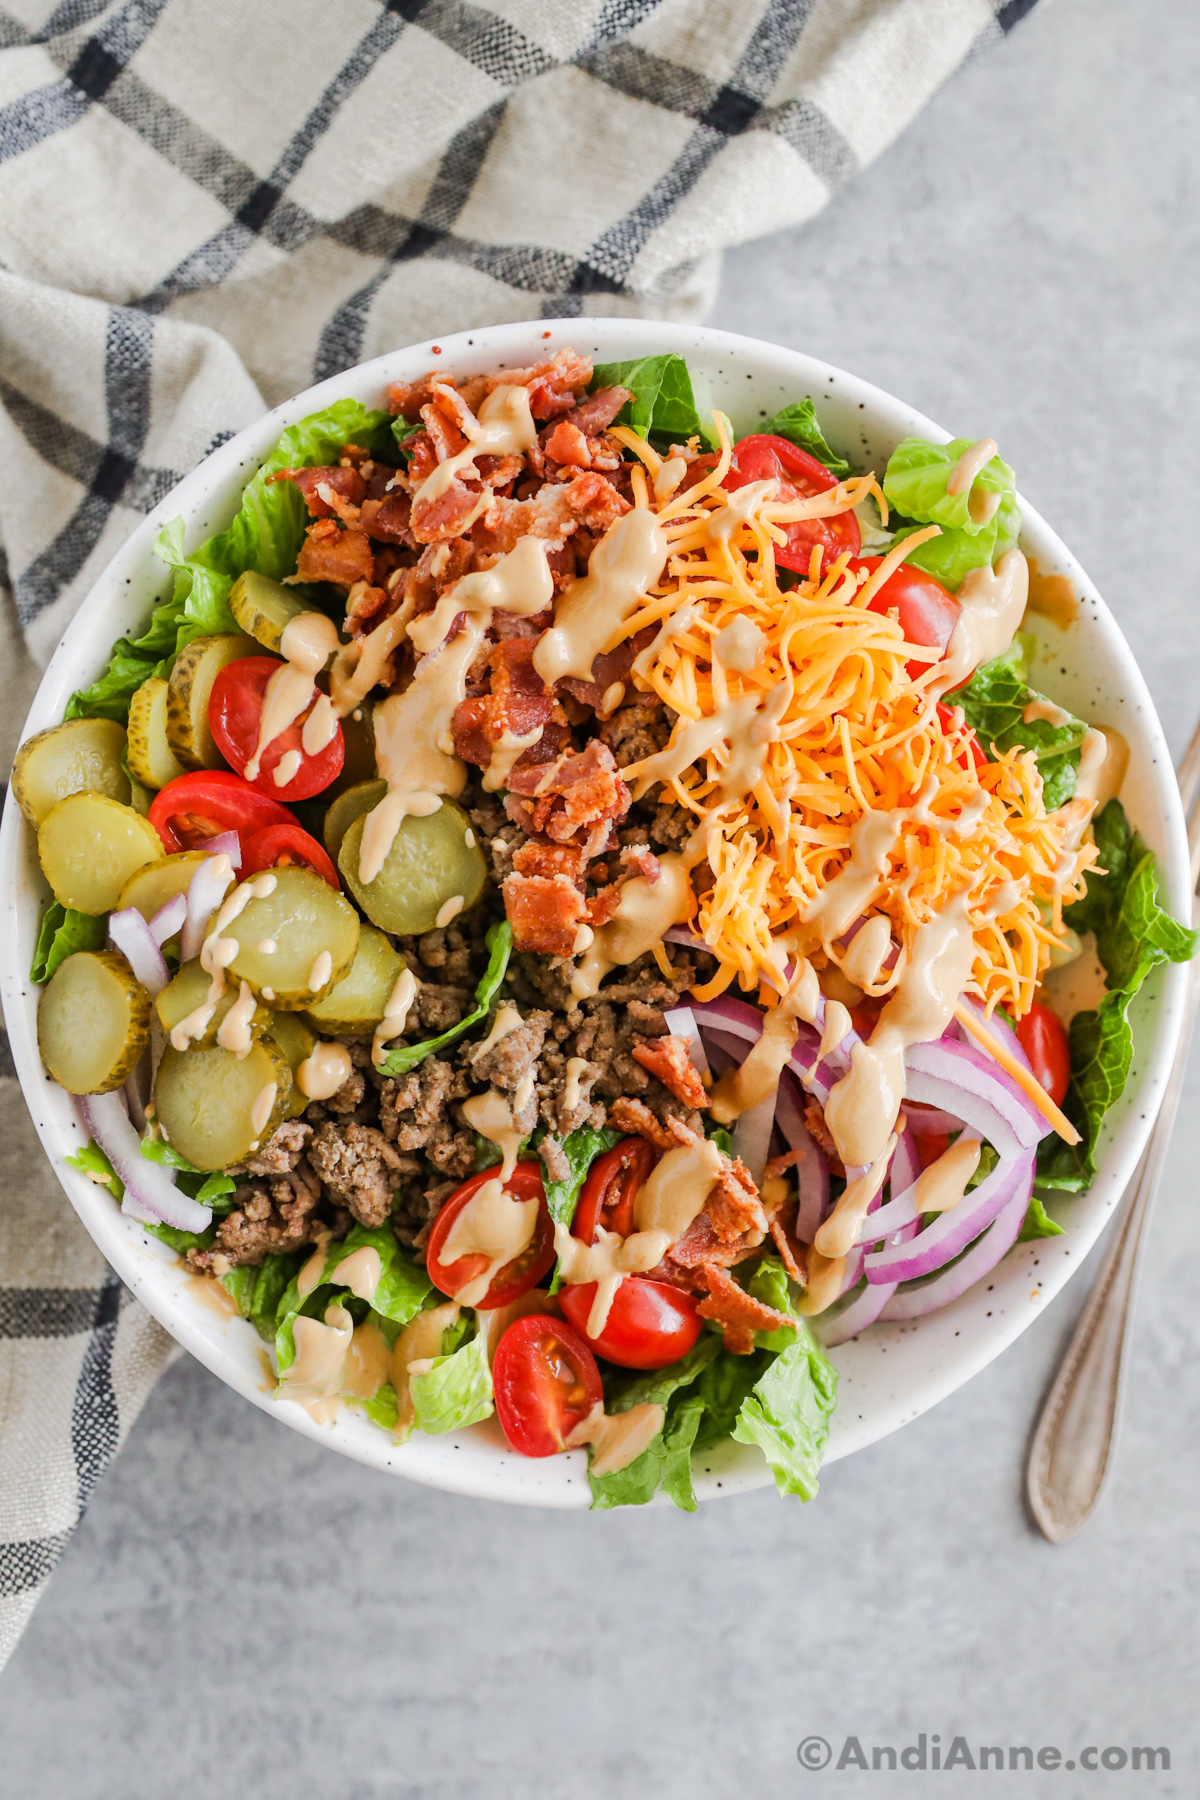 A burger salad bowl recipe with pickles, ground beef, cheese, bacon, onion and drizzled with dressing.